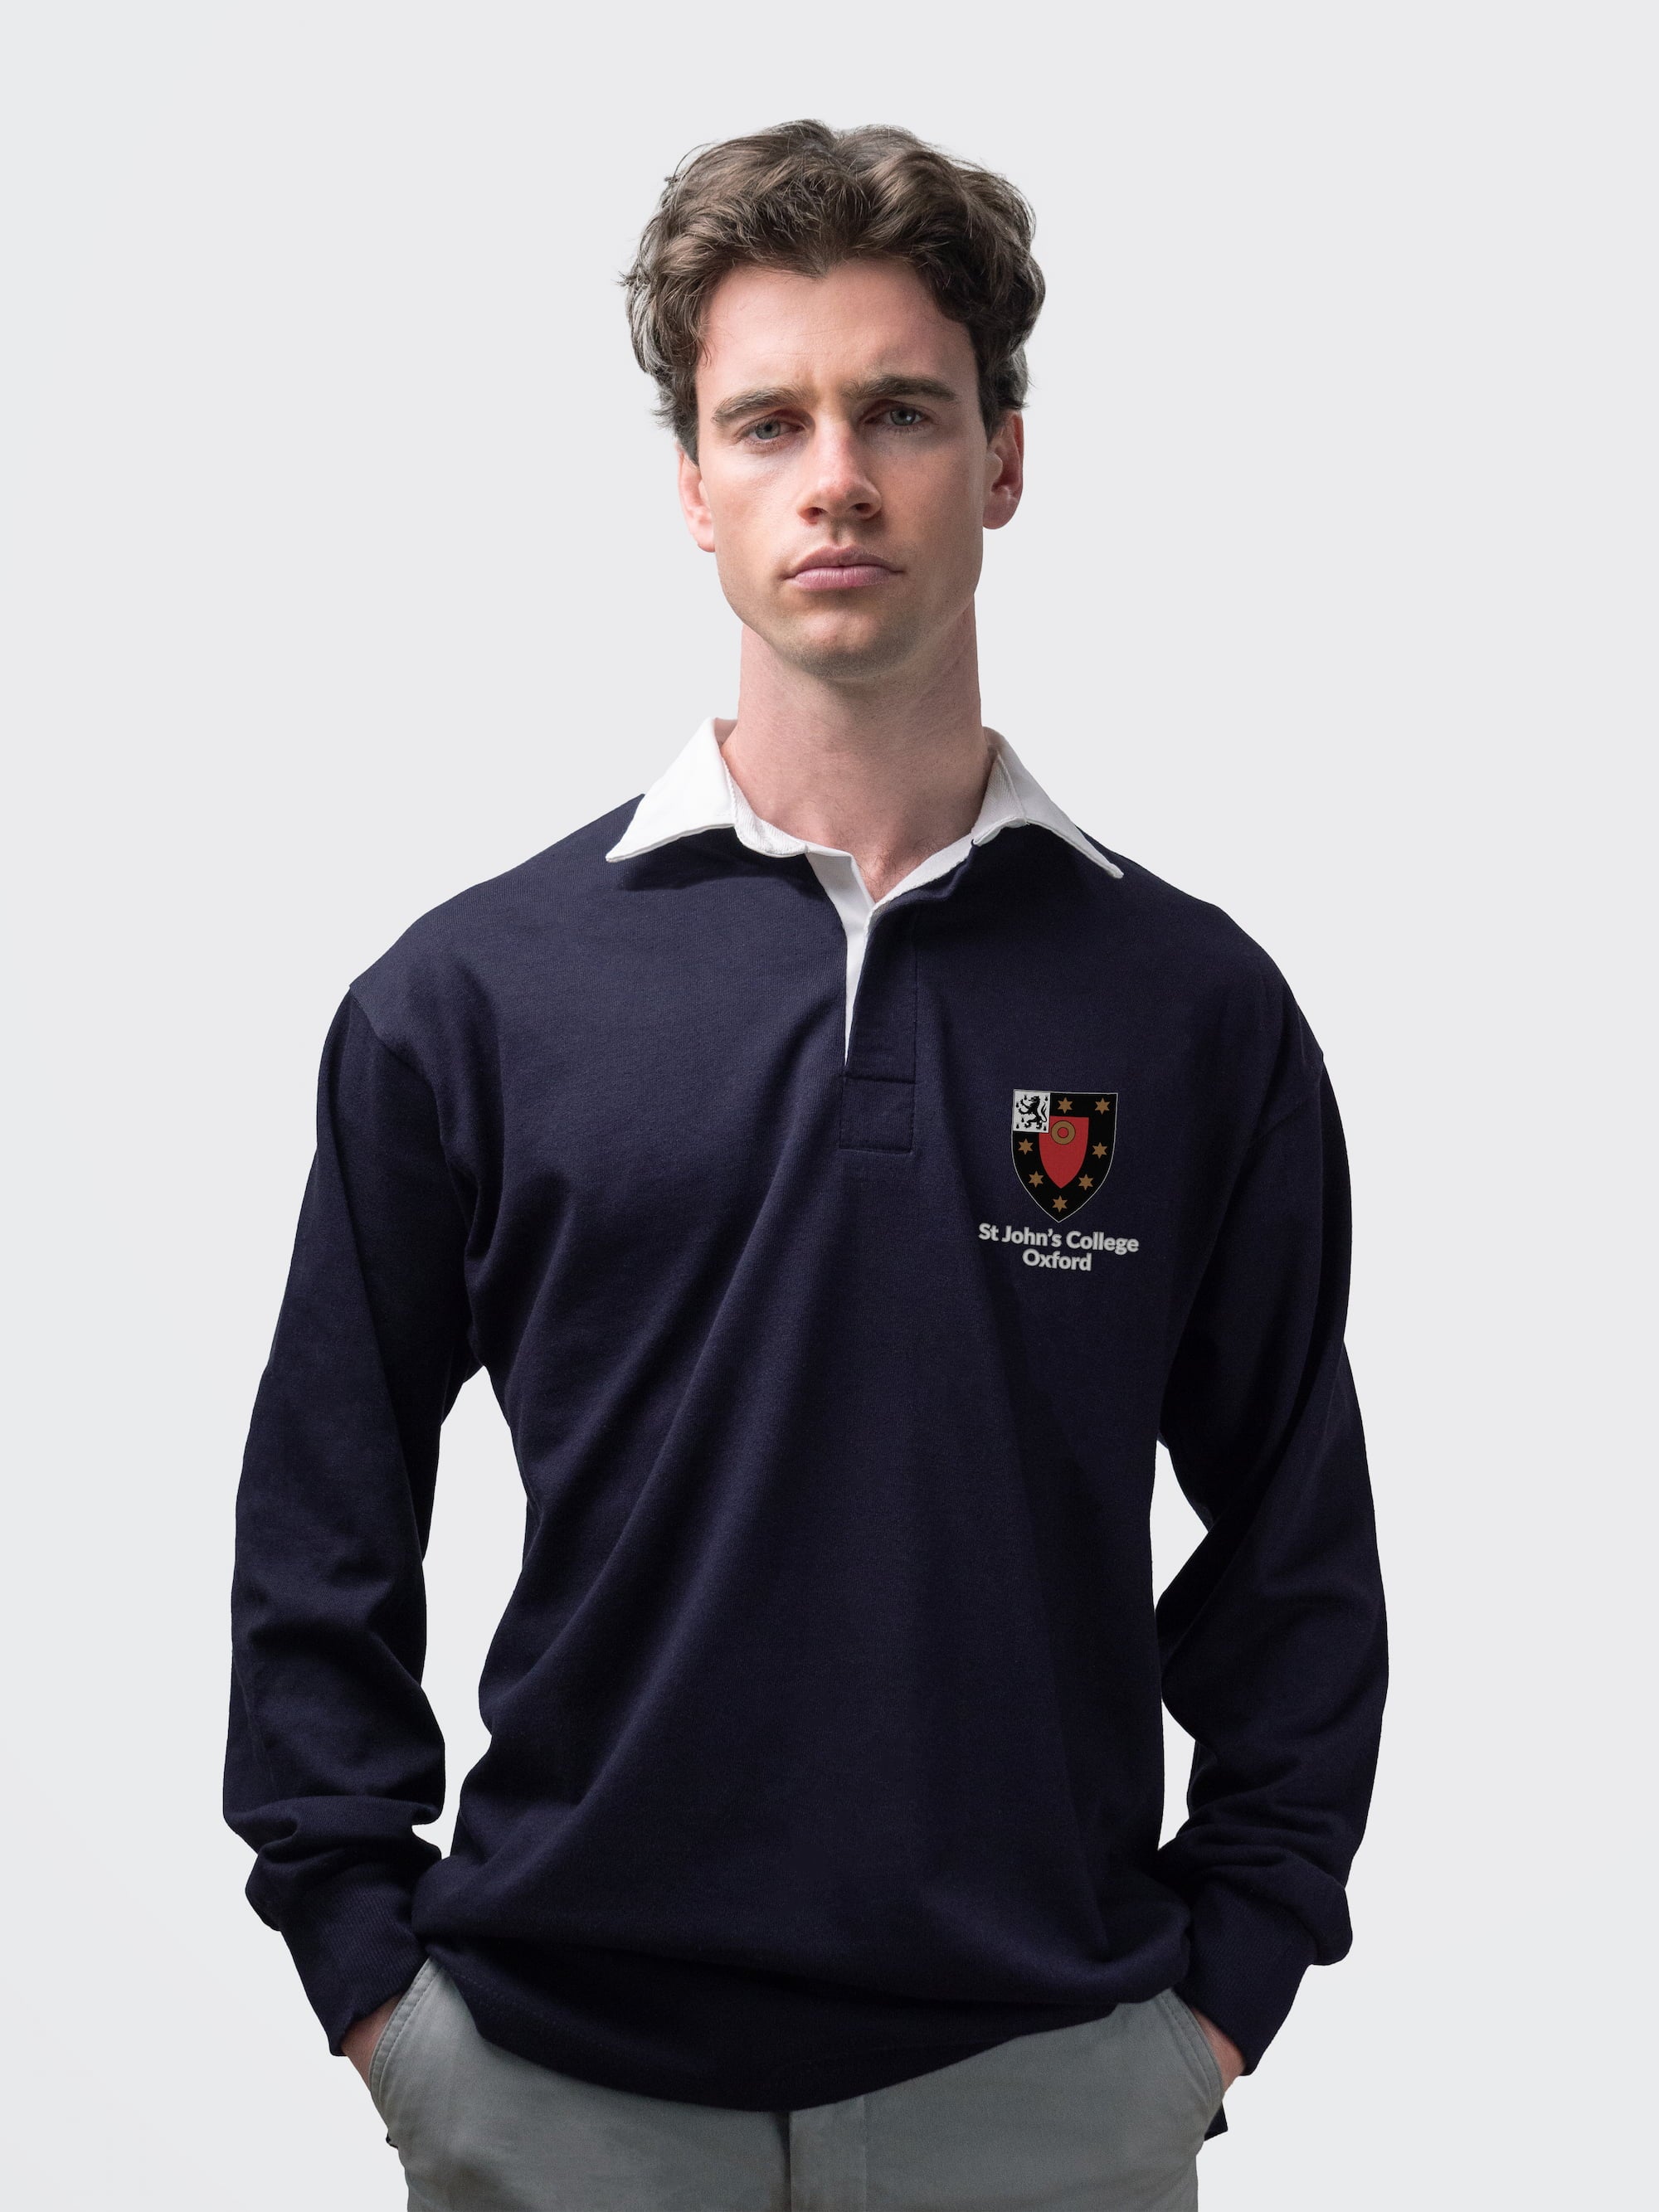 St John's student wearing an embroidered mens rugby shirt in navy